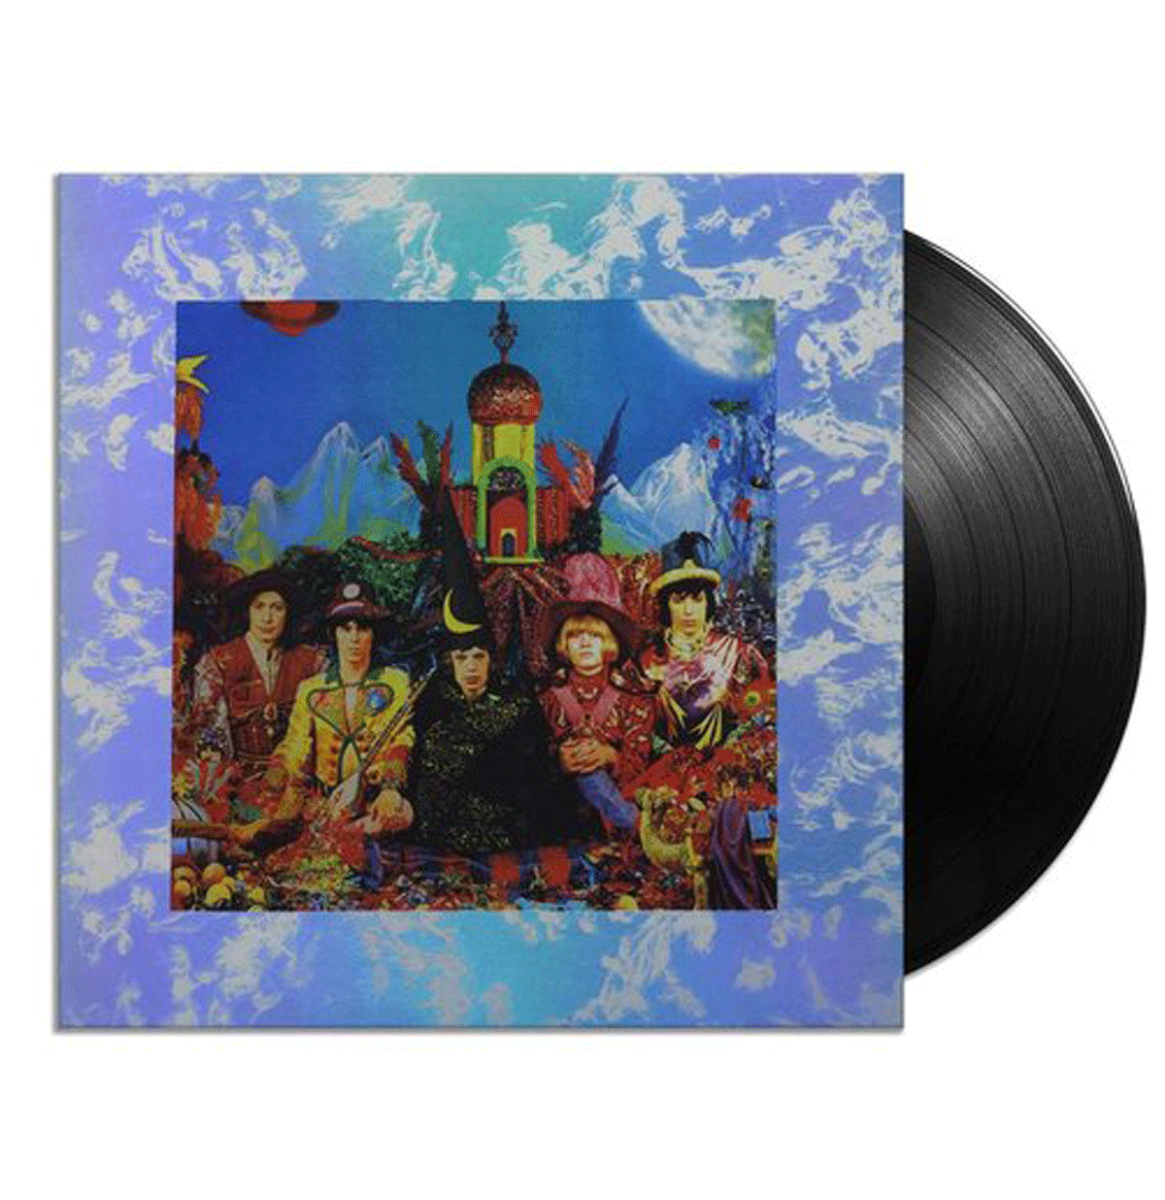 The Rolling Stones - Their Satanic Majesties Request LP